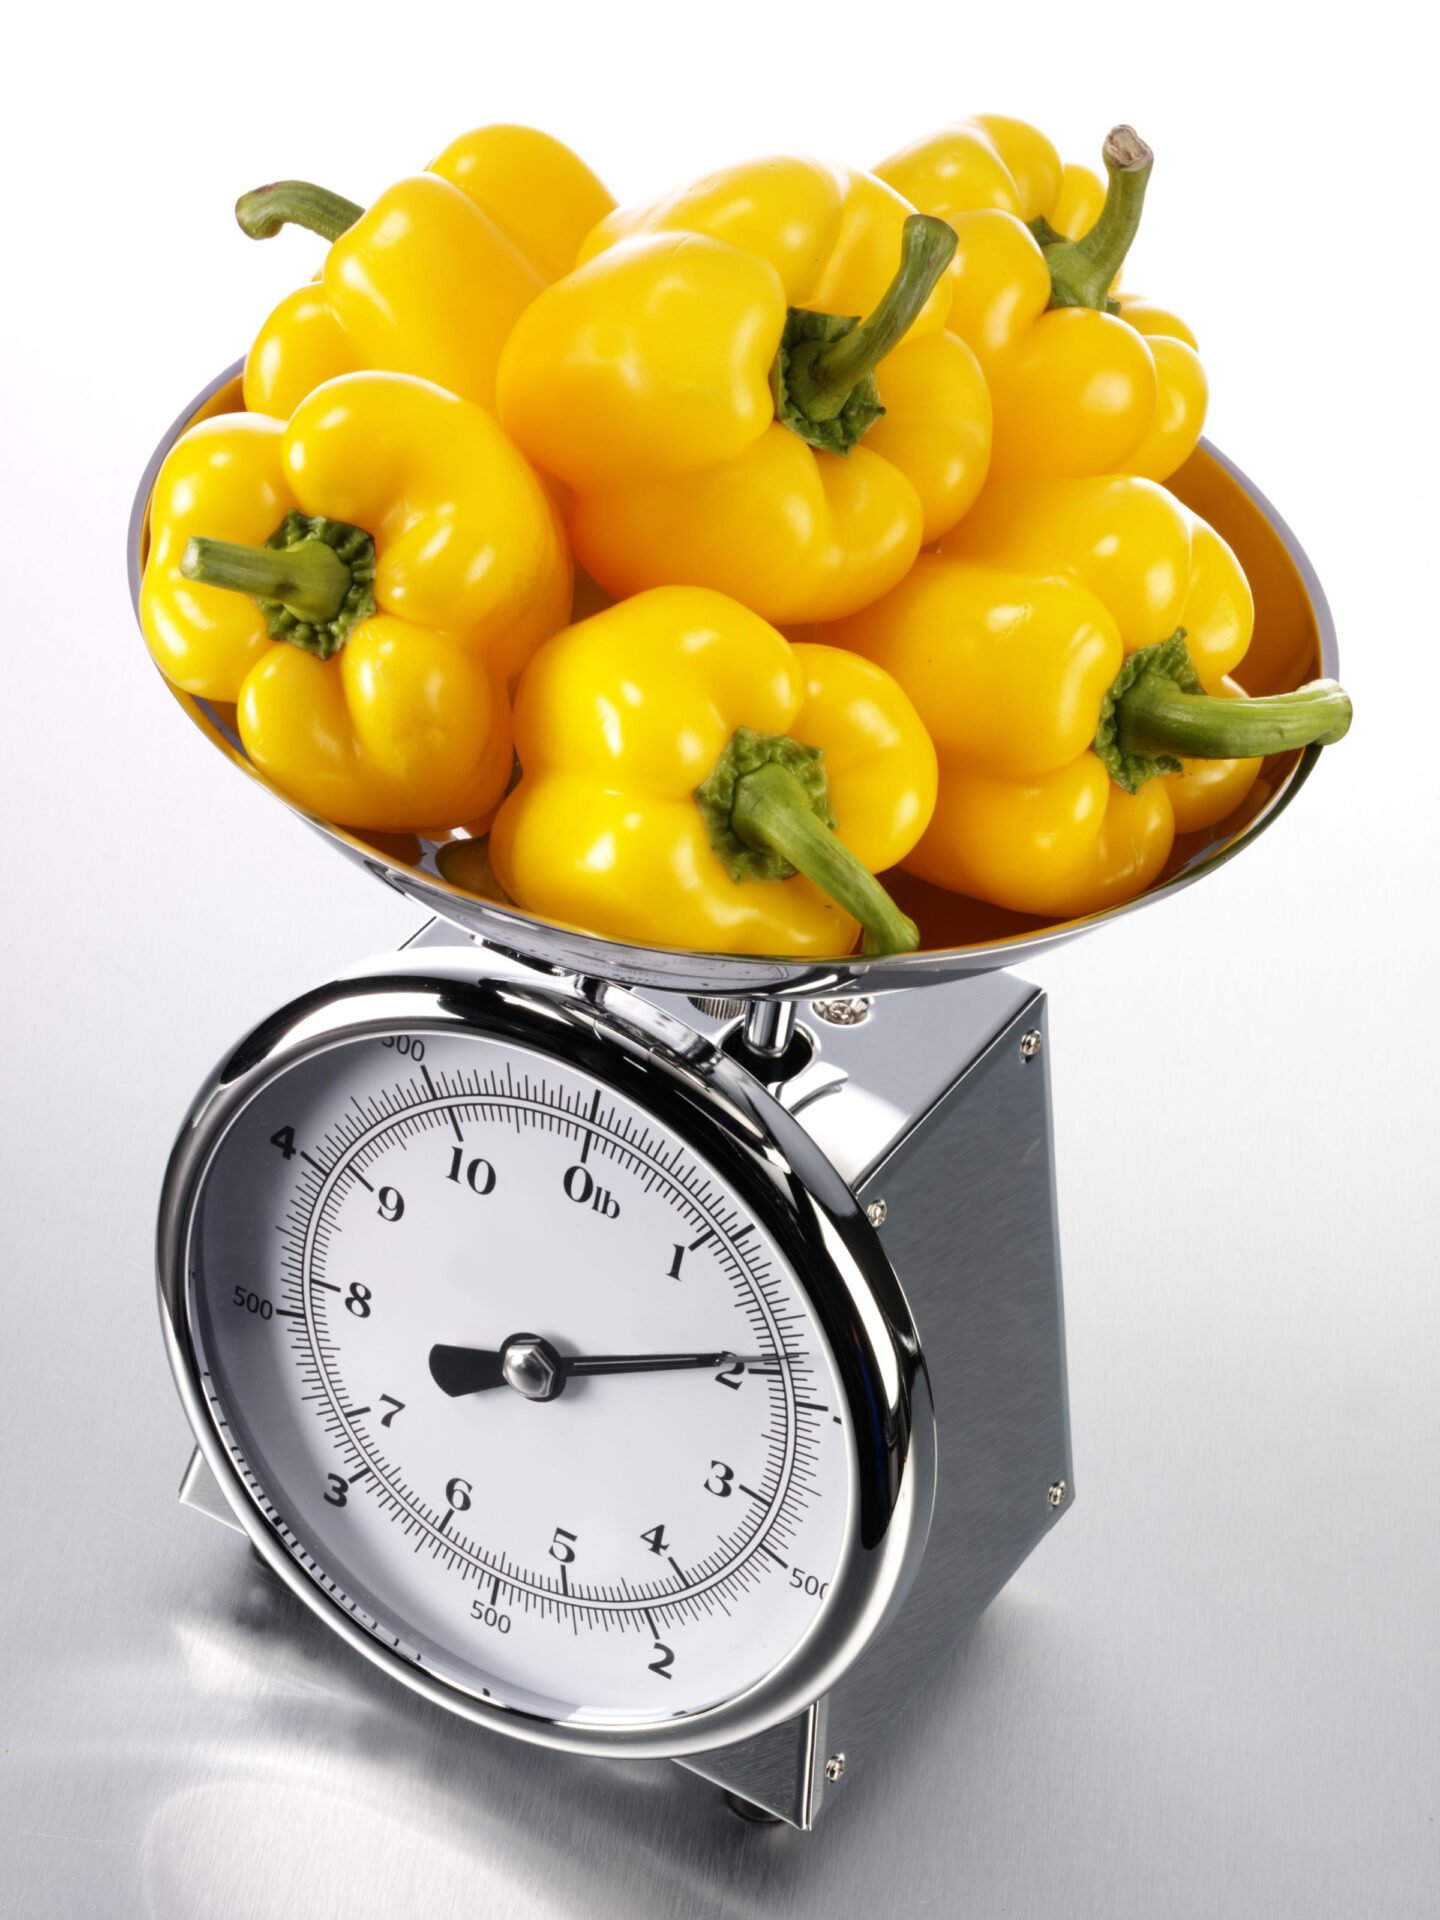 yellow bell peppers on a kitchen scale